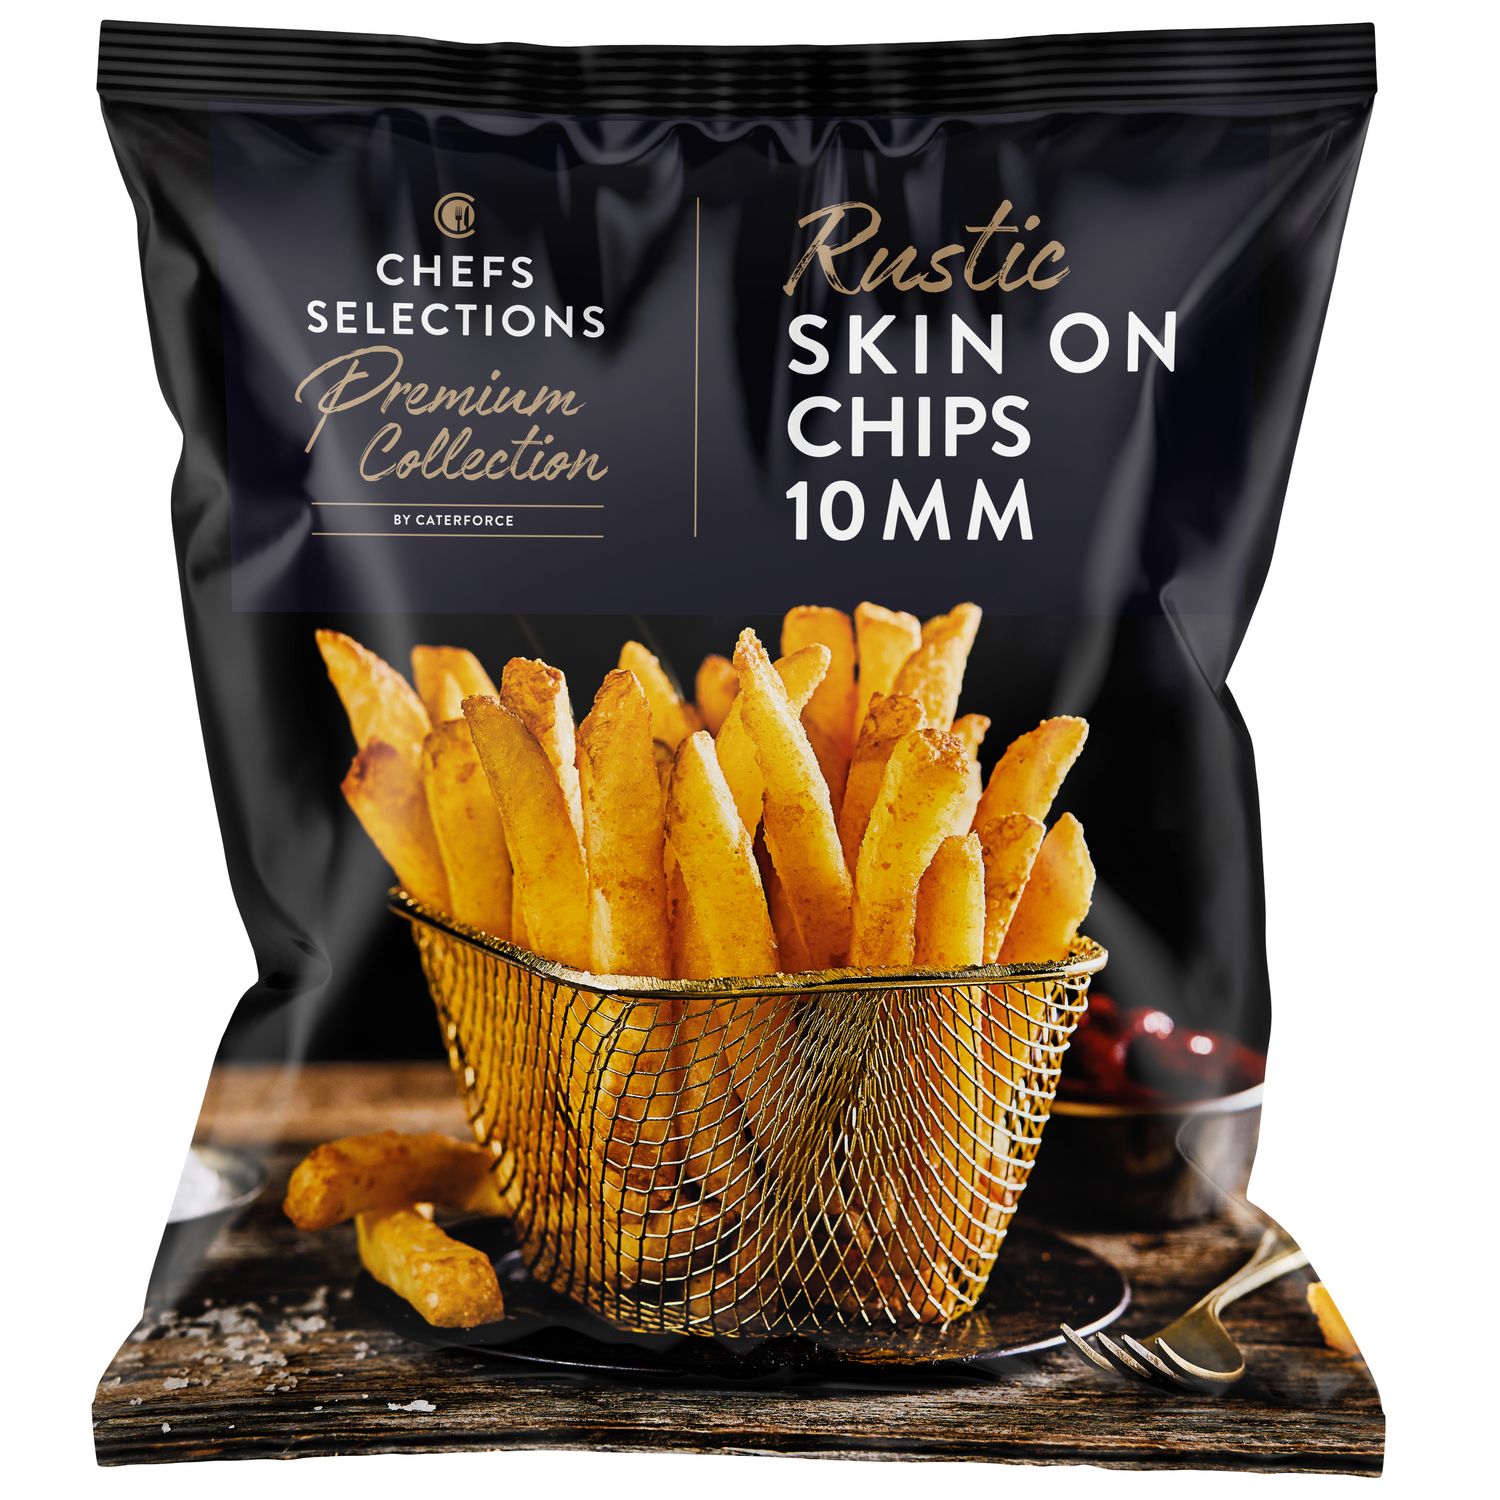 Chefs’ Selections Premium Rustic Skin-on Fries 10mm (4 x 2.27kg)